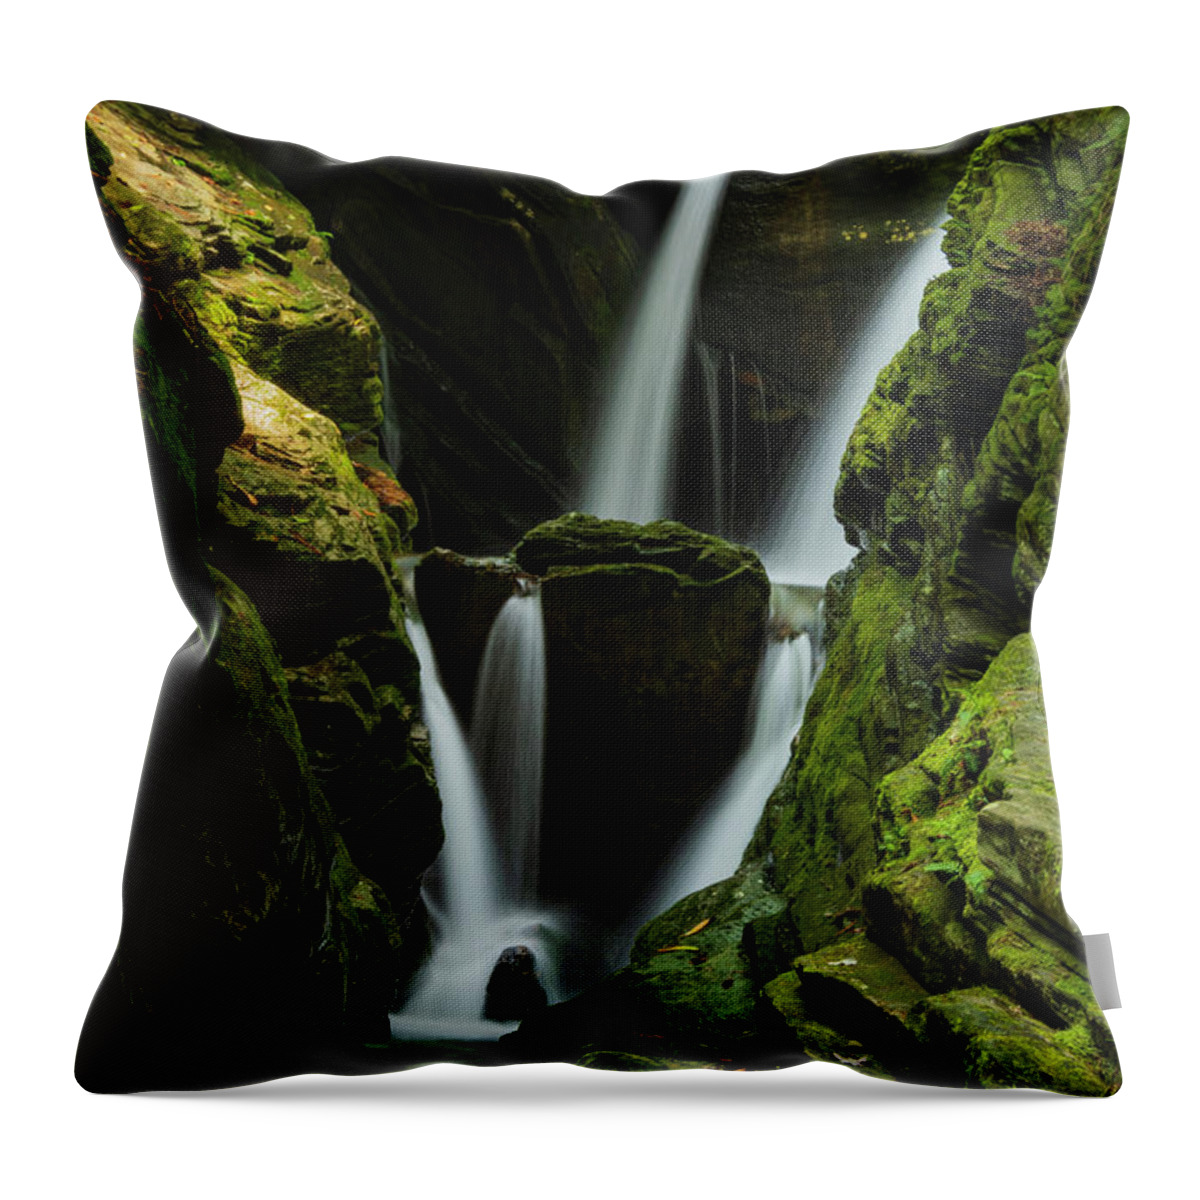 Blue Ridge Mountains Throw Pillow featuring the photograph Duggars Creek Falls 1 by Melissa Southern